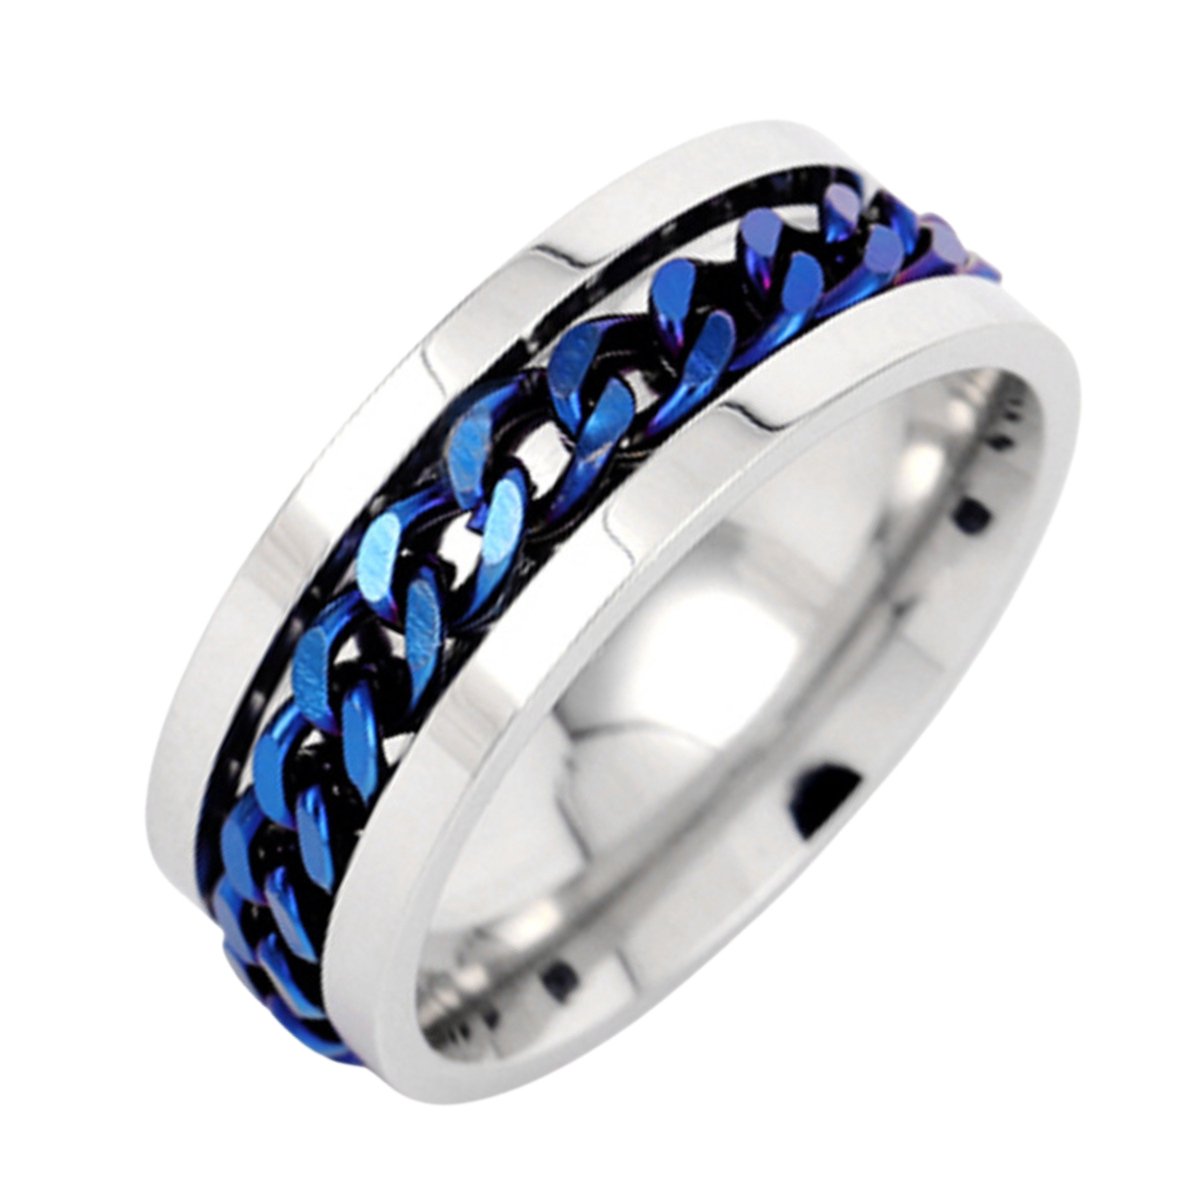 Anxiety Ring - (Kettinkje) - Stress Ring - Fidget Ring - Anxiety Ring For Finger - Draaibare Ring - Spinning Ring - Blauw - (17.50mm / maat 55)